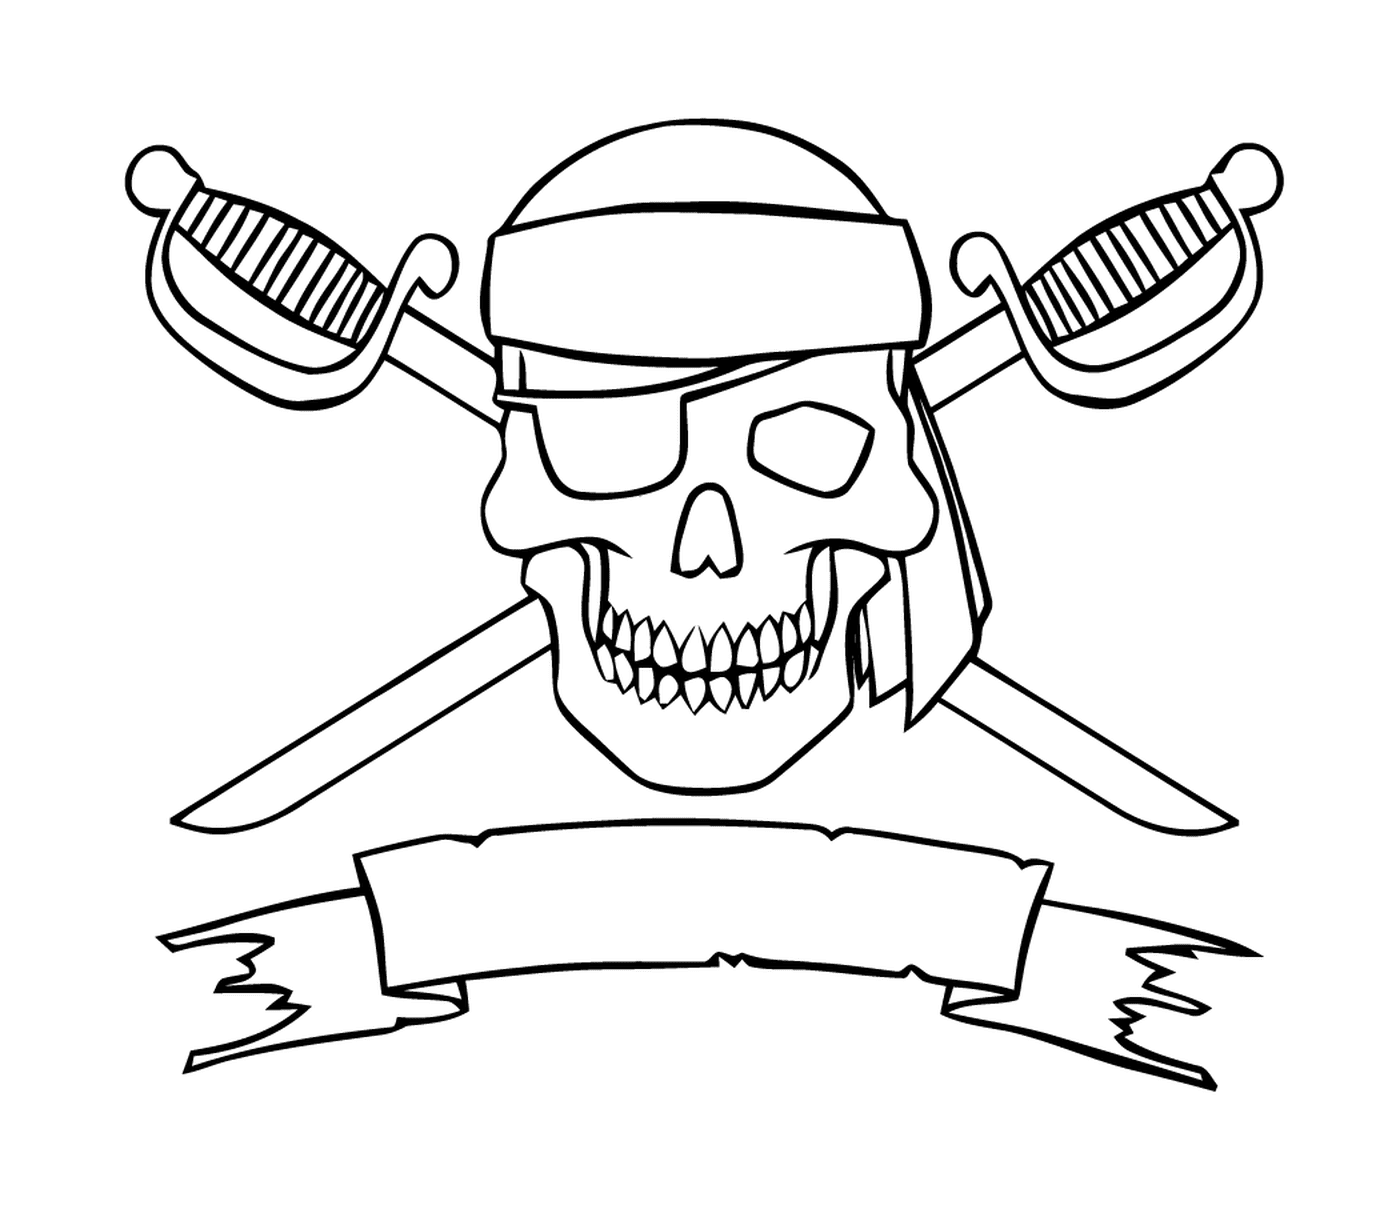  Scary pirate logo, crossed swords 